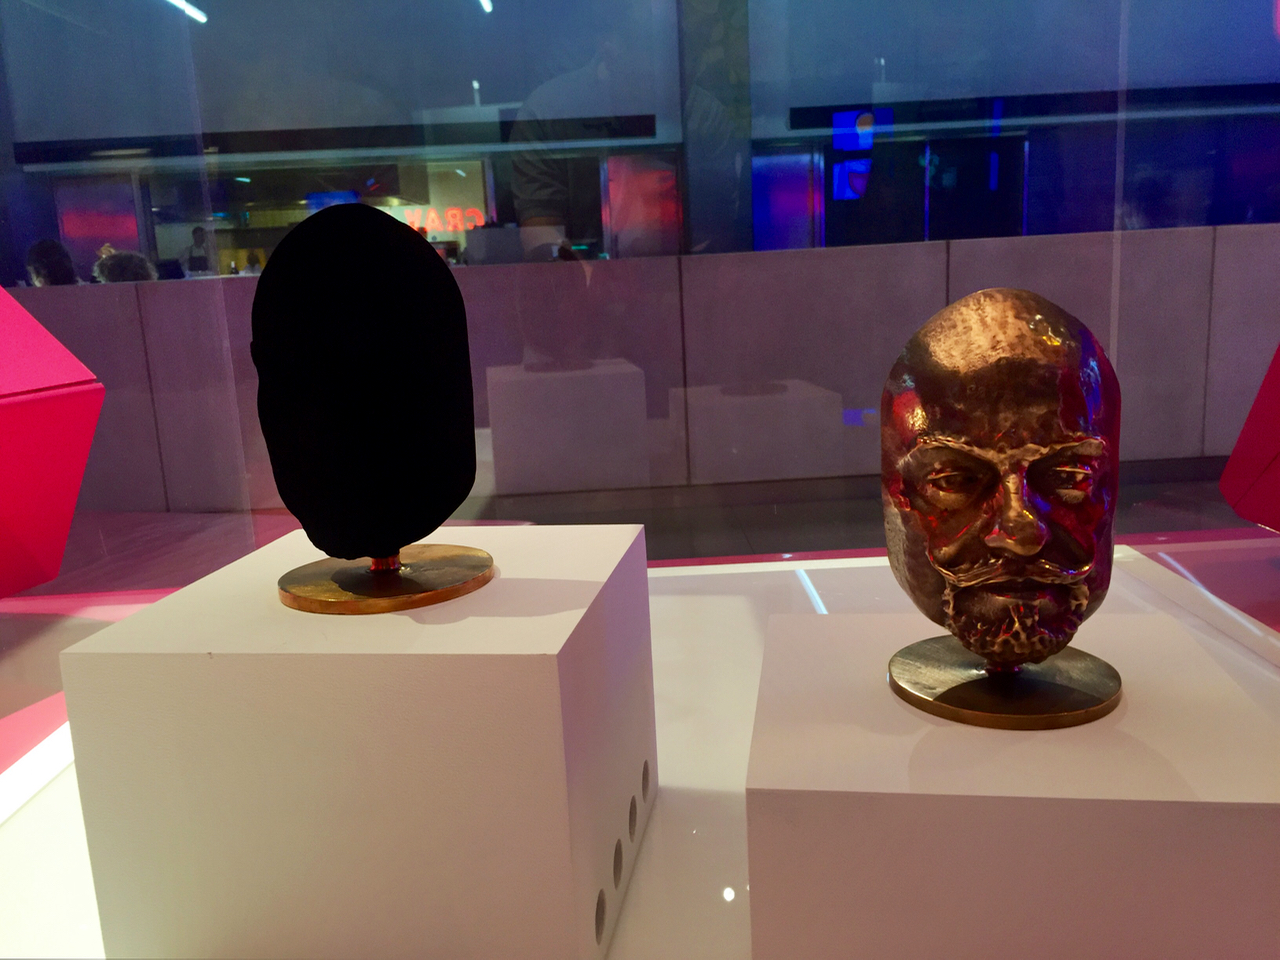  Two identical sculptures, one coated with Vantablack, the world's darkest material (on the left, obviously) 